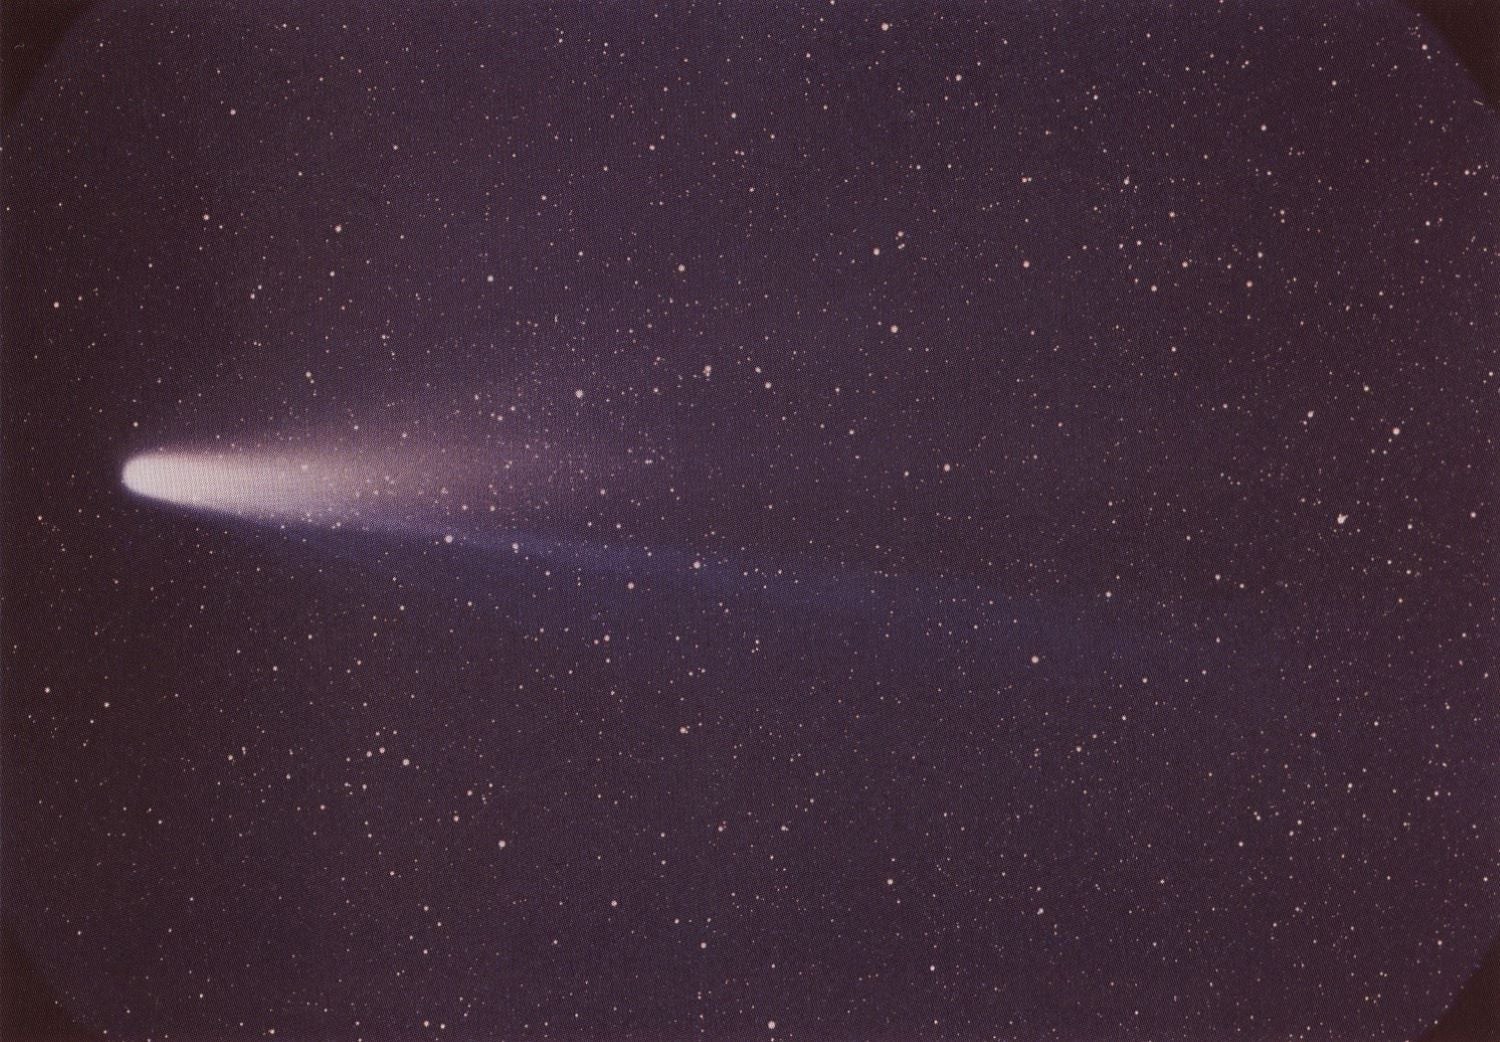 A color photo of Halley Comet, taken in 1986 when the object passed close to Earth.